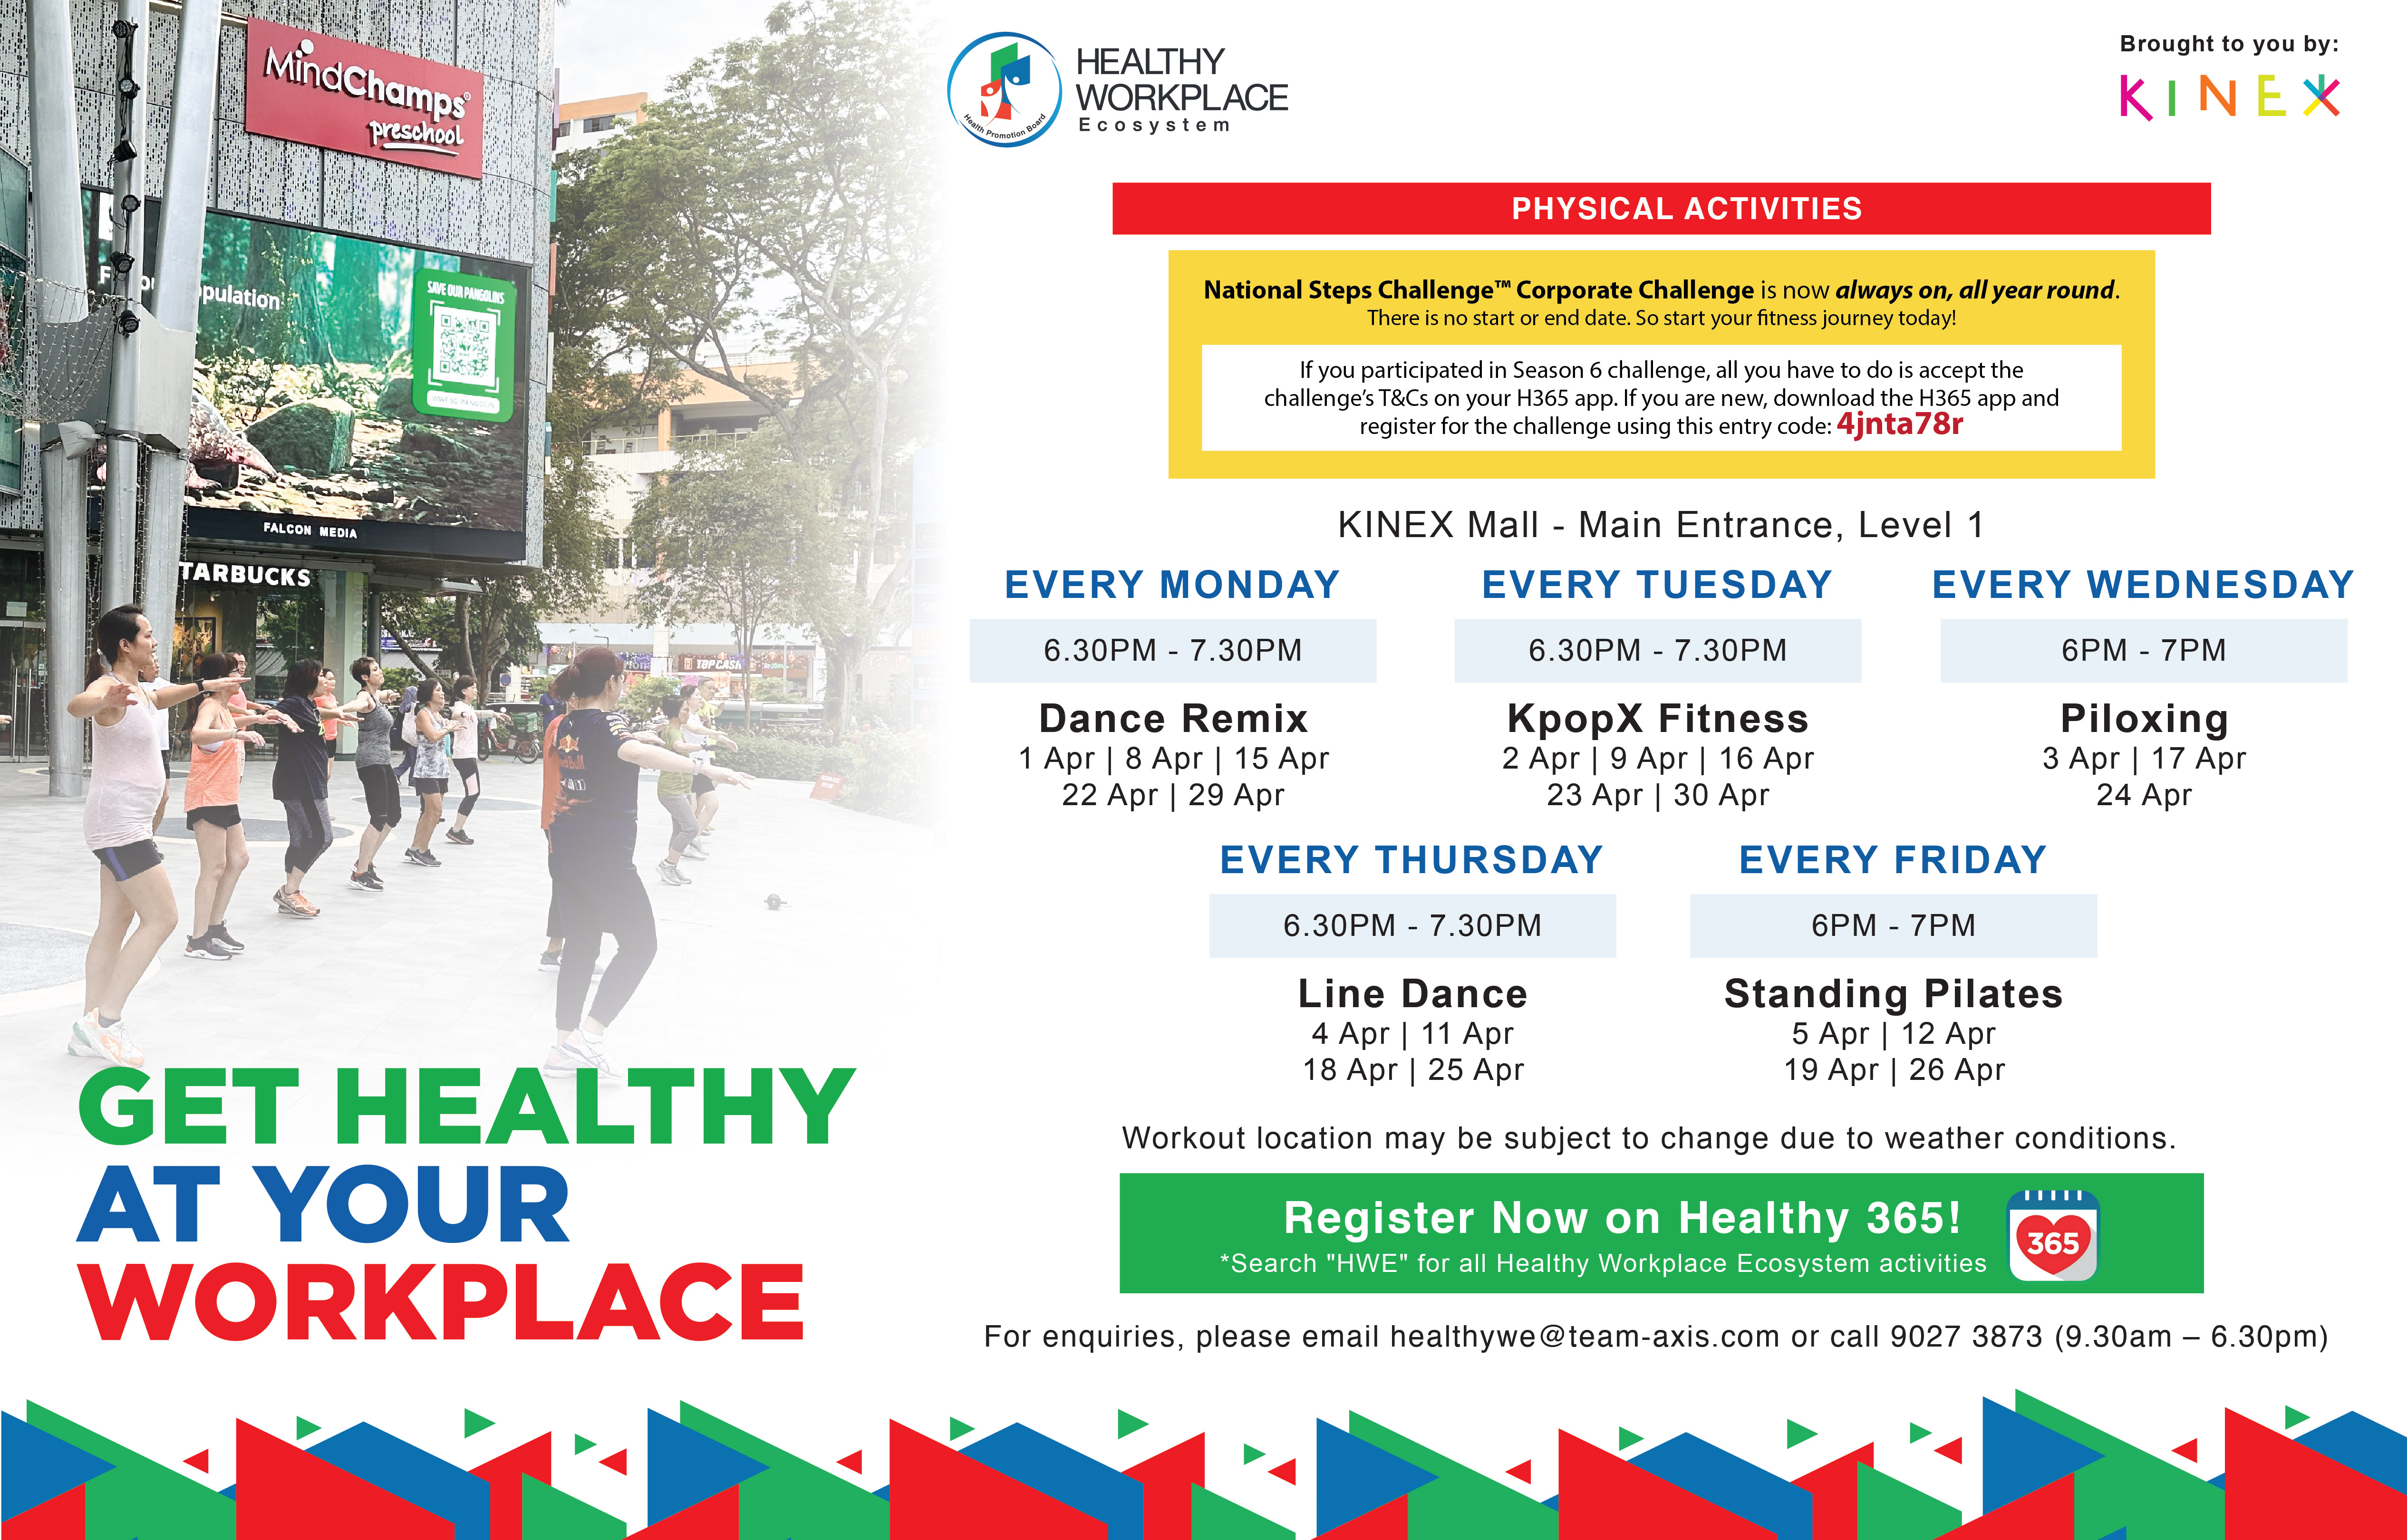 Healthy Workplace Ecosystem Mall Workout at KINEX